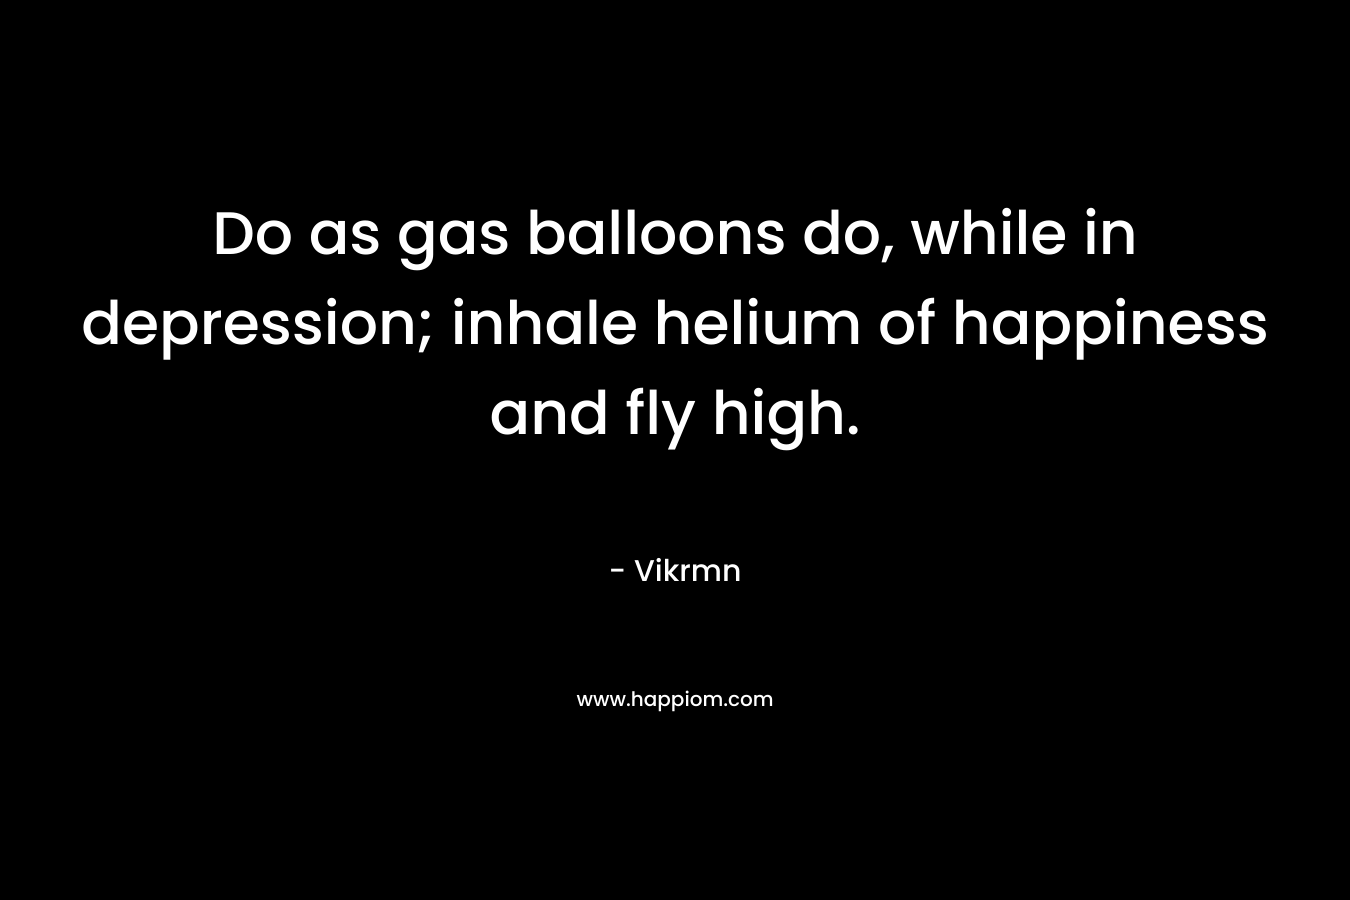 Do as gas balloons do, while in depression; inhale helium of happiness and fly high.